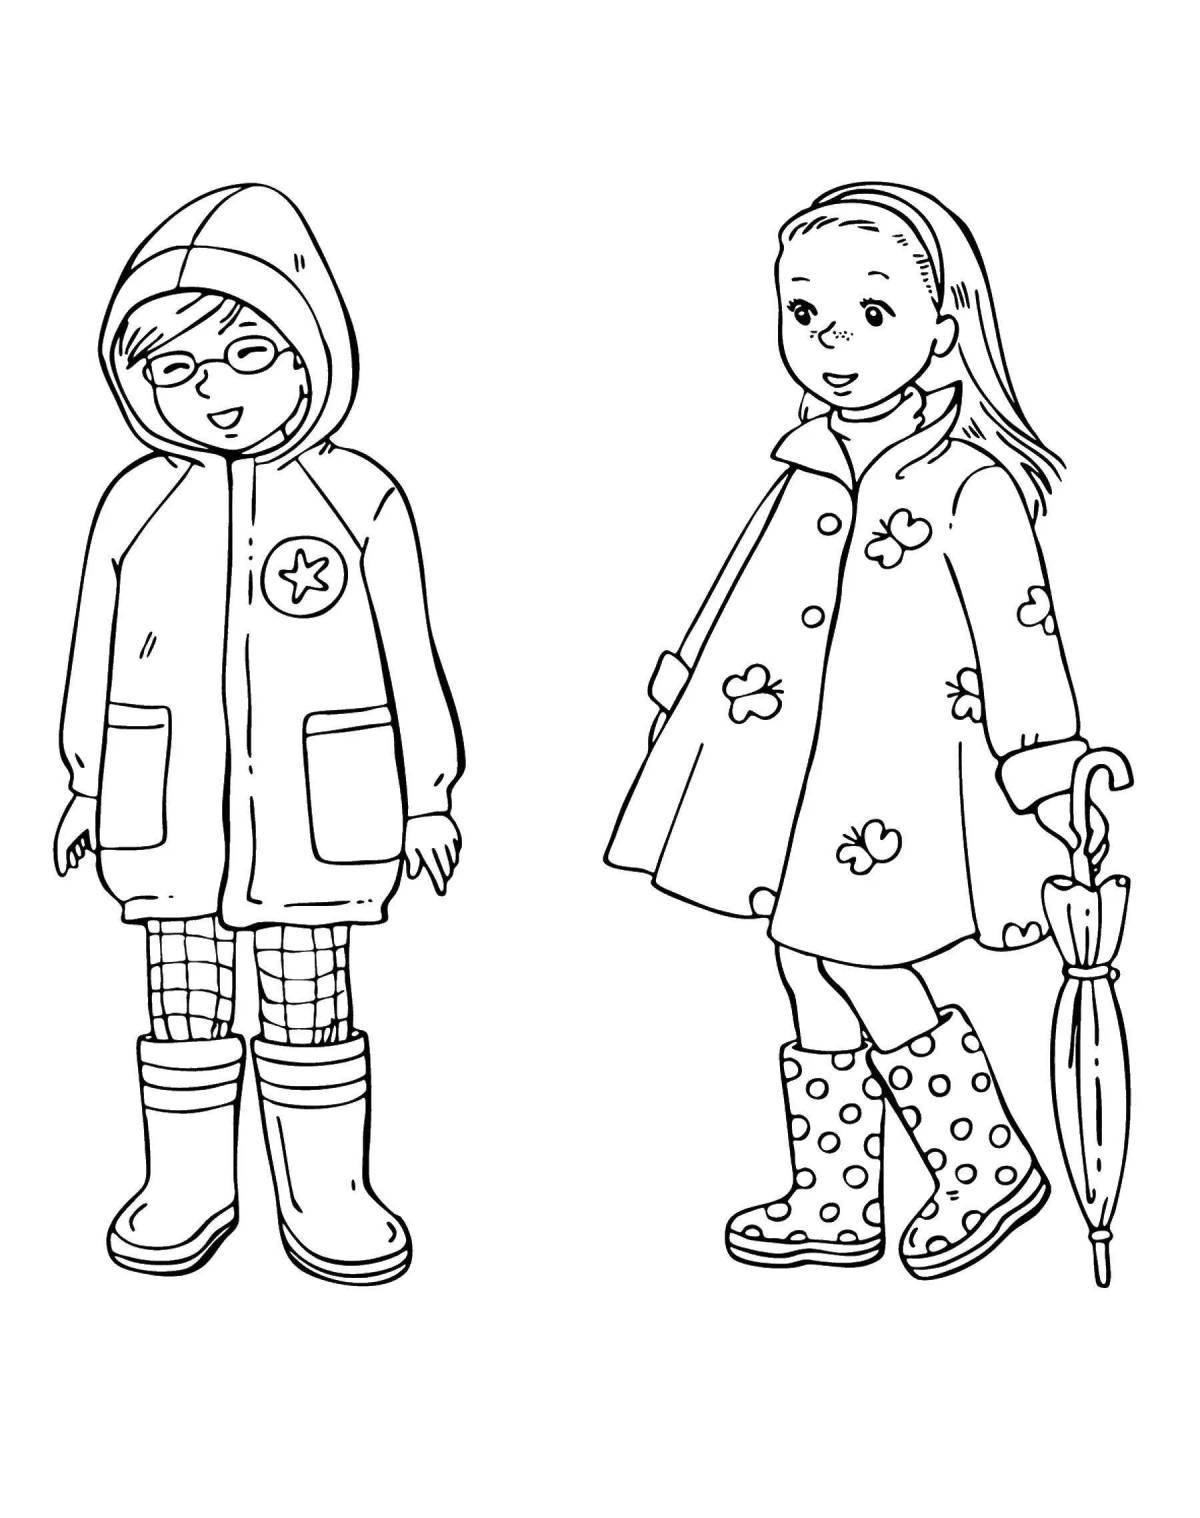 Coloring pages with cute winter clothes for kids